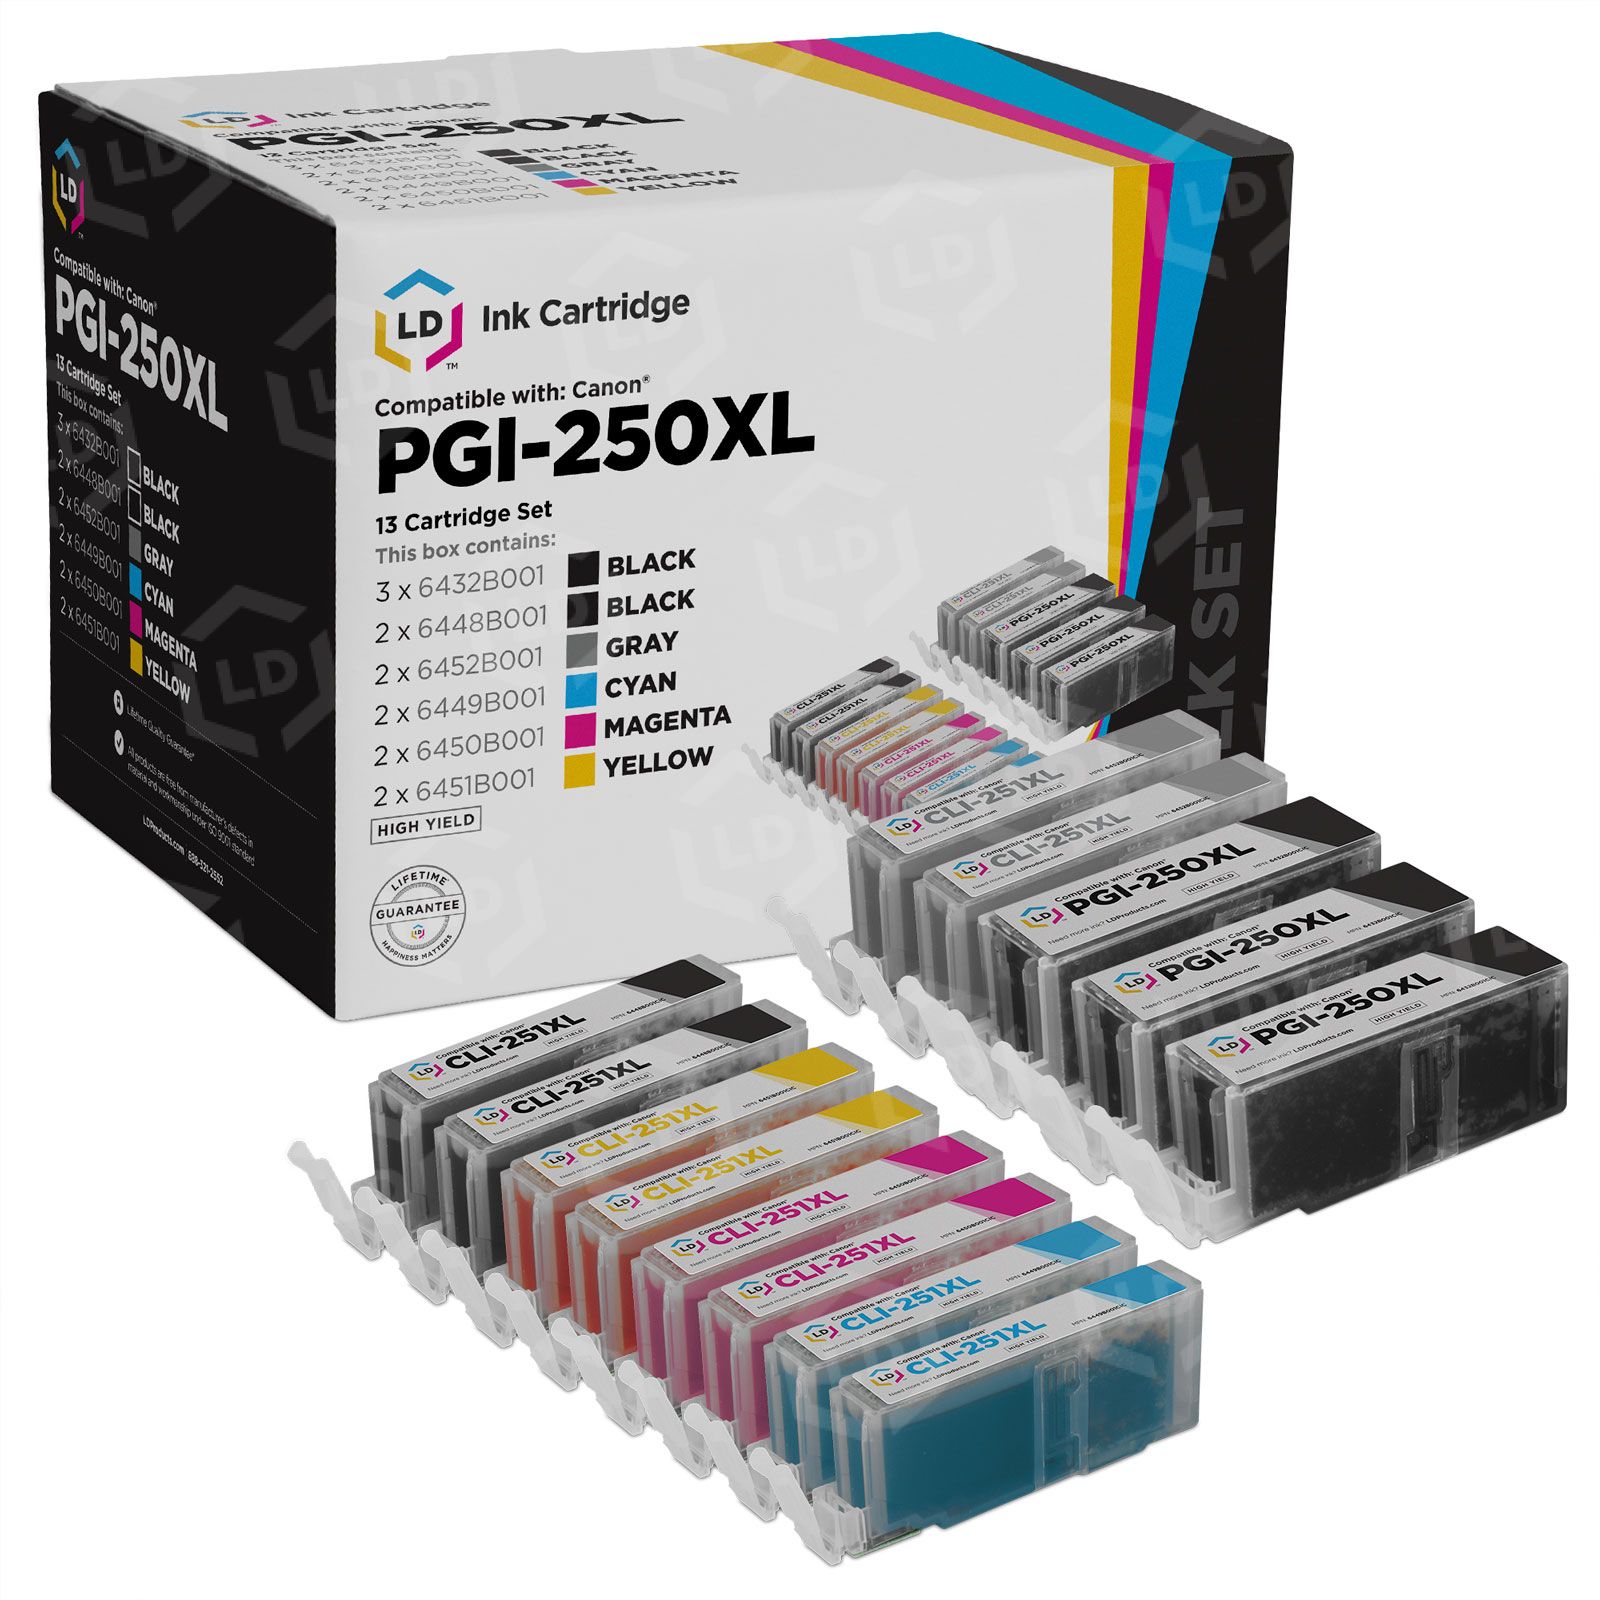 Affordable 13-Cartridge Set For Canon PGI250CICBDLG Ink - LD Products